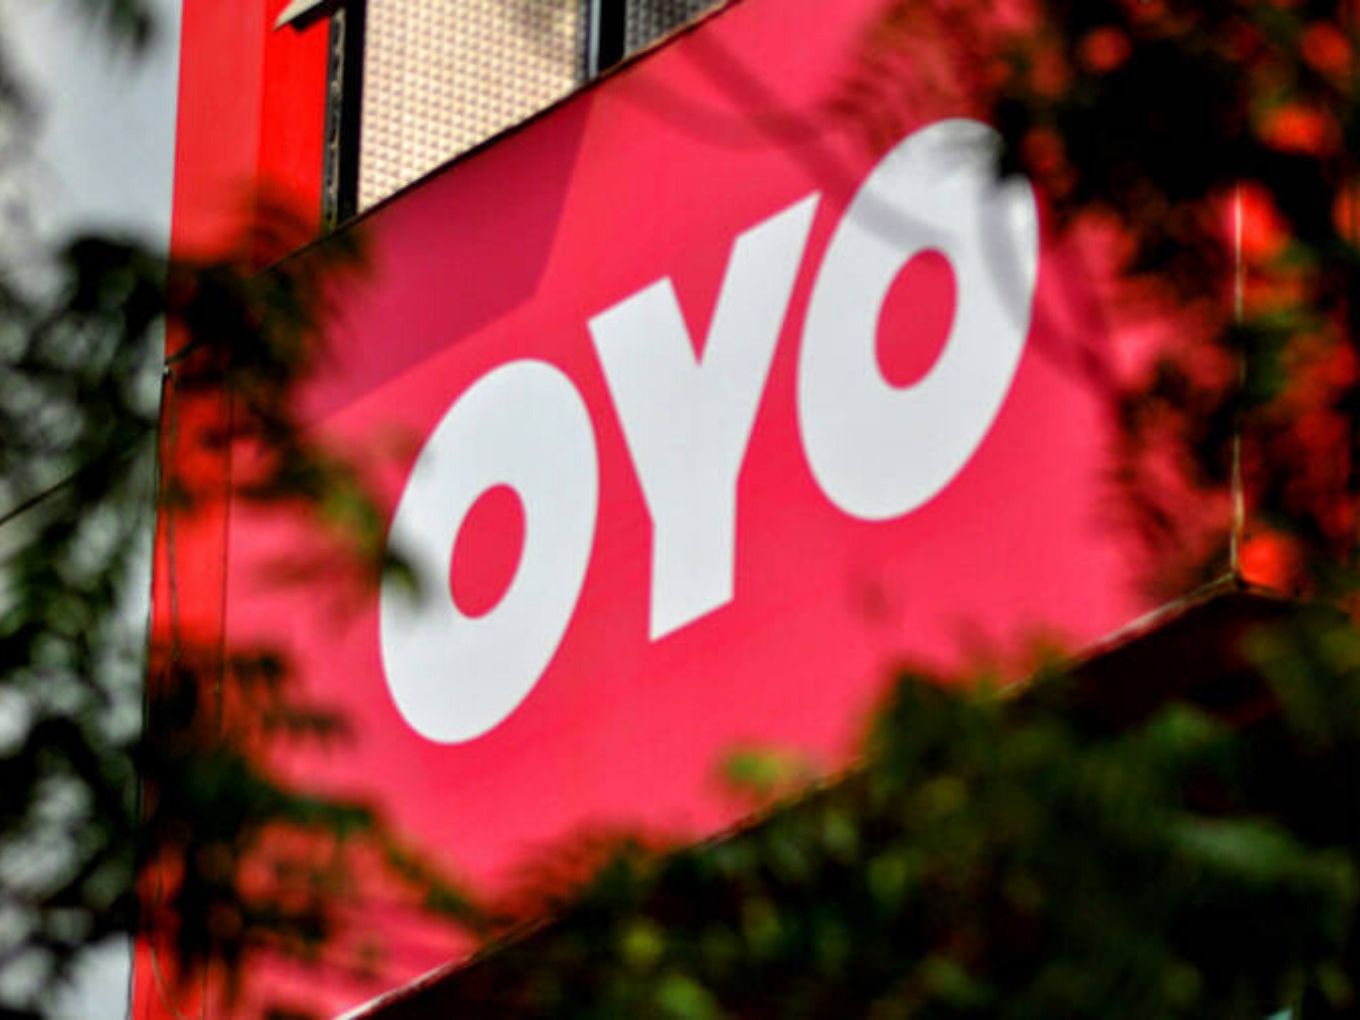 Oyo Denies Mass Layoffs Amid Reports Of Cost-Cutting